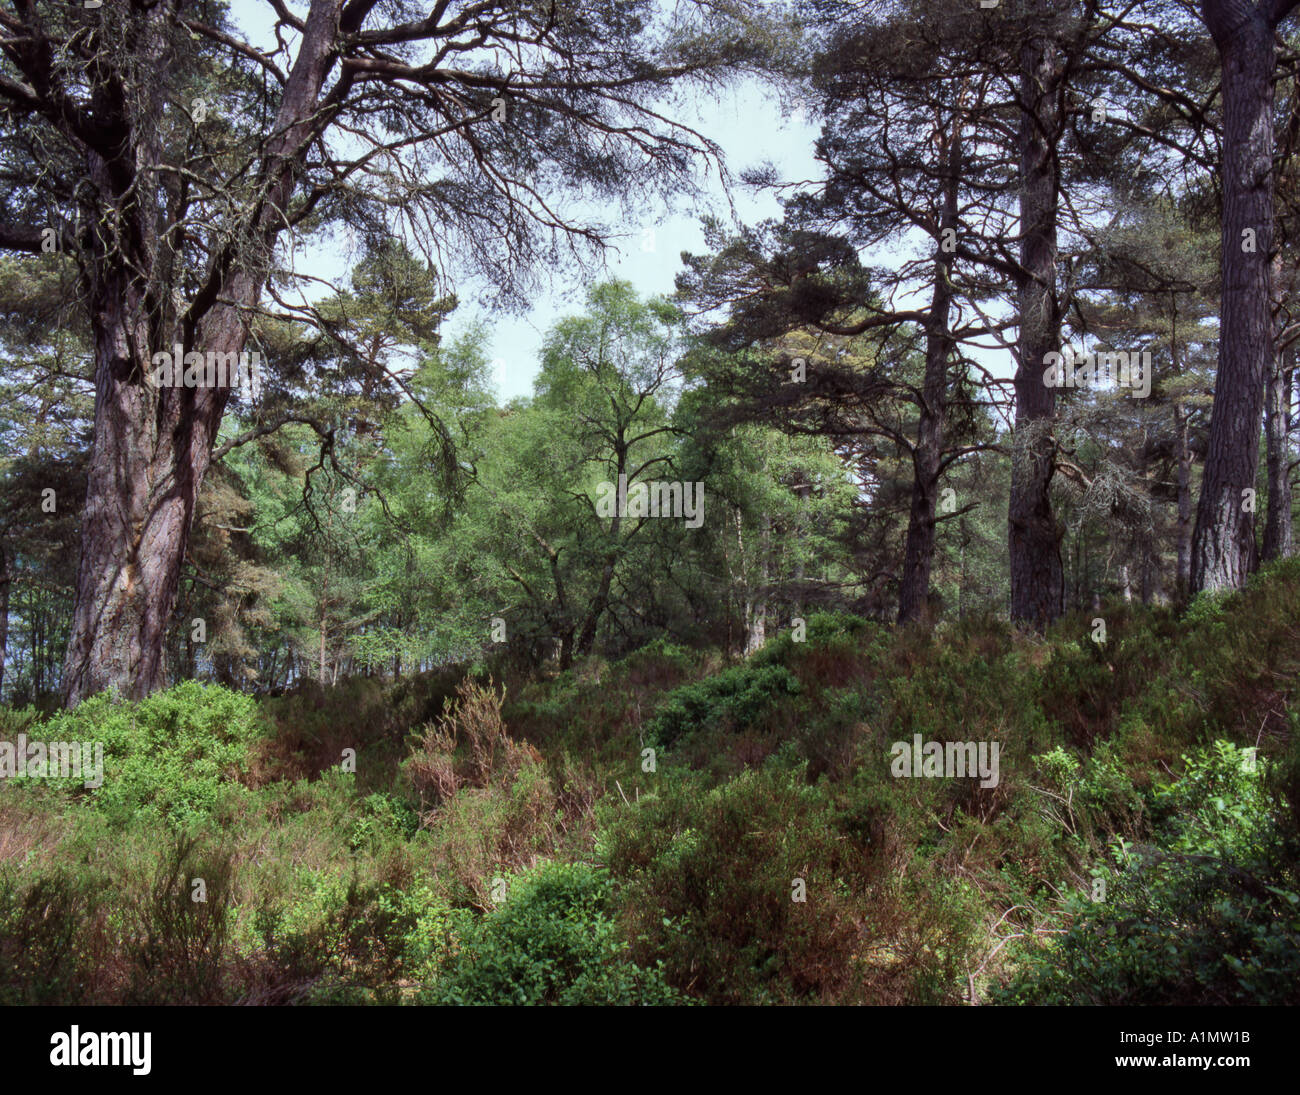 Native Caladonian Scots Pines Billberry Heather Black Wood of Rannoch Tay Forest Park Scotland May Stock Photo